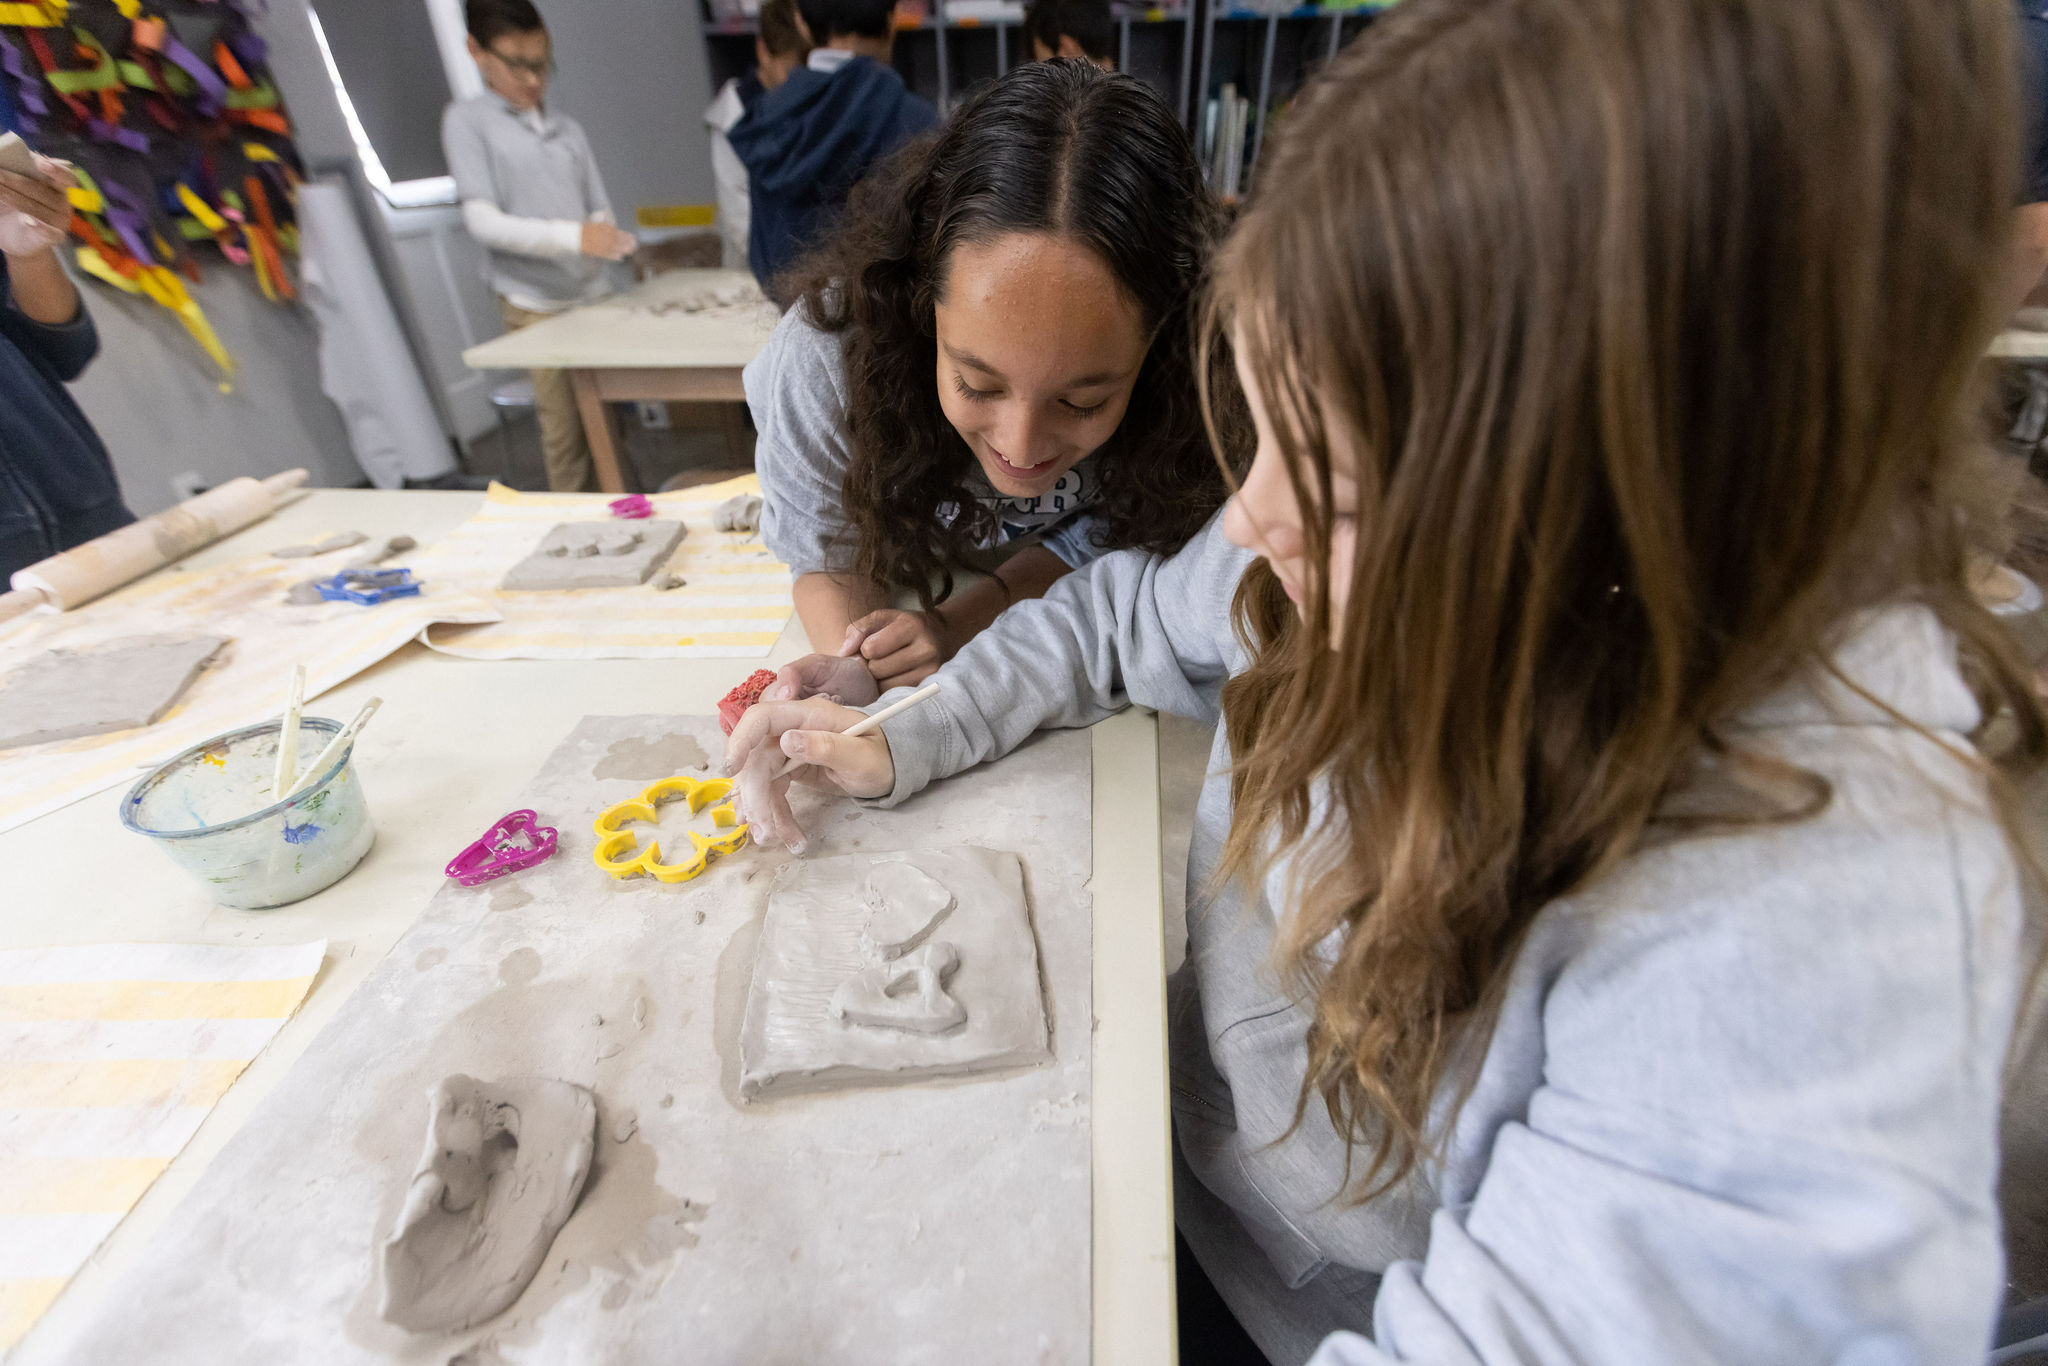 Two girls in a Sierra Canyon visual arts program classroom, creating clay sculptures together.